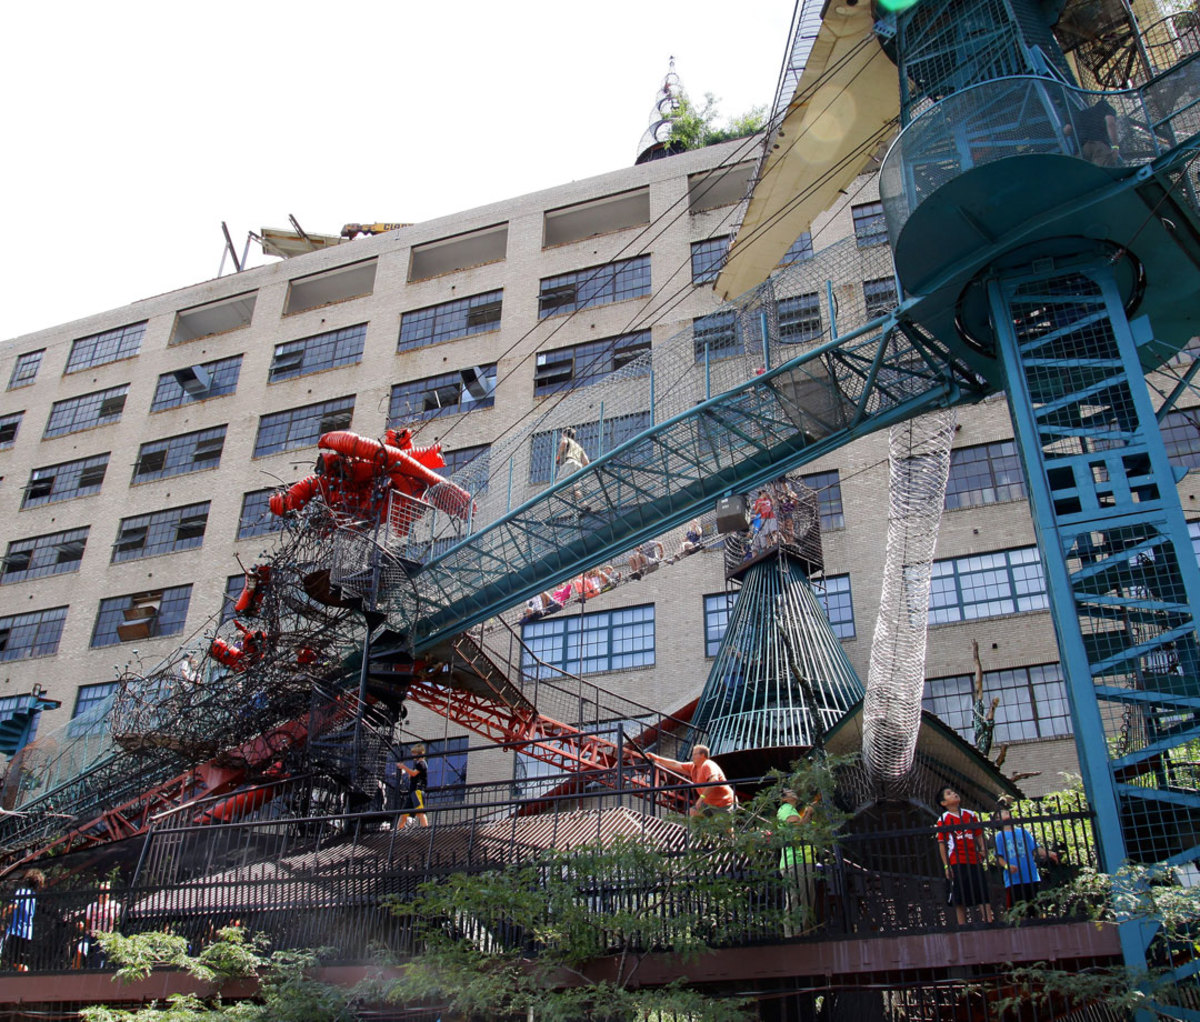 Kids and adults enjoy a day at the St. Louis City Museum, in St. Louis, Missouri